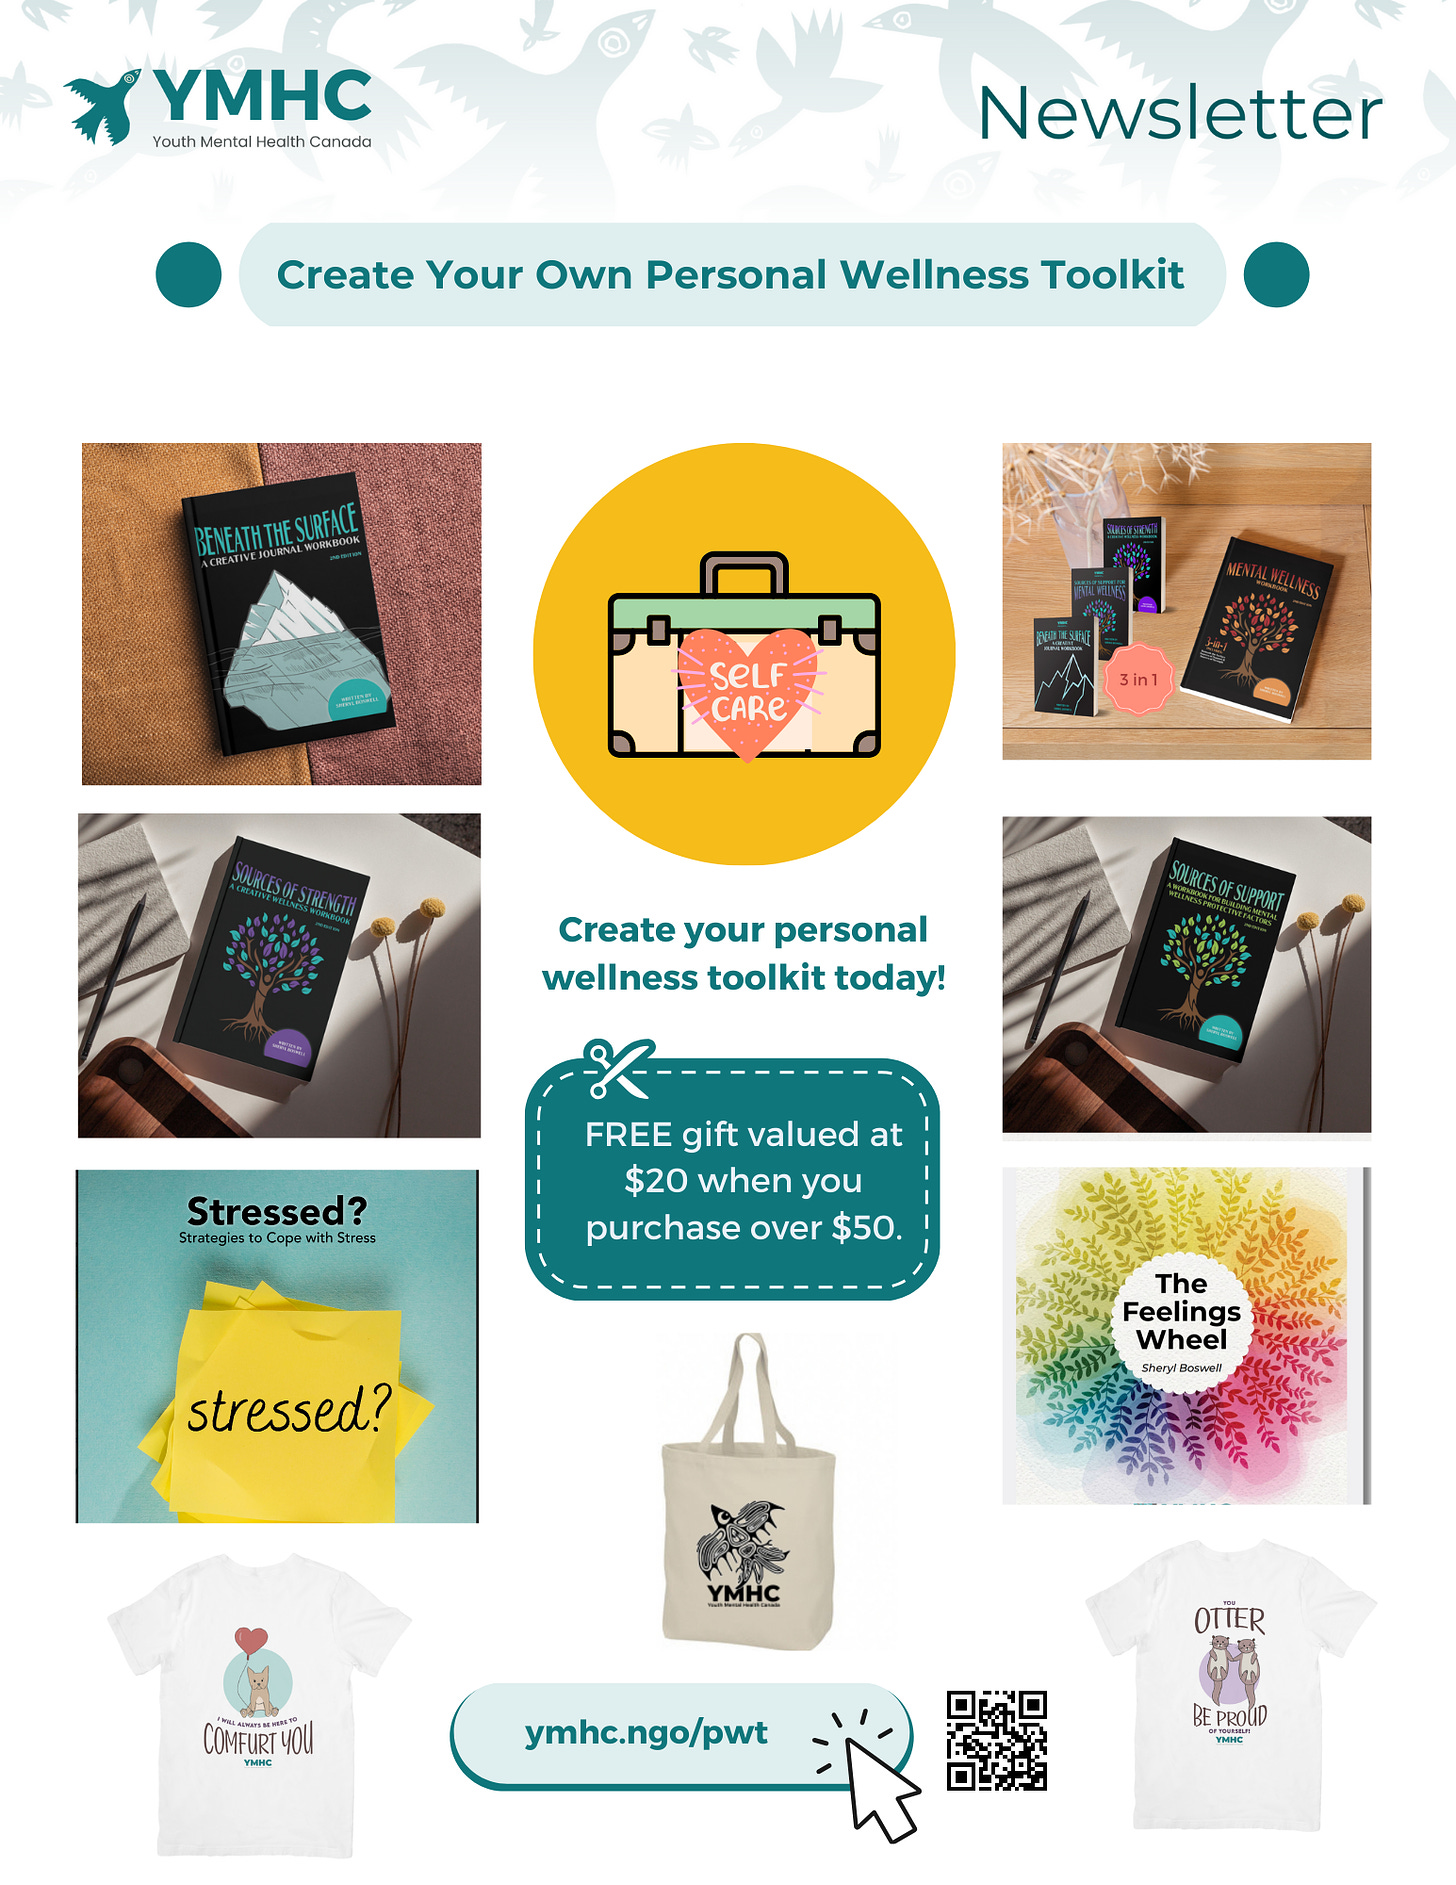 Create Your Own Personal Wellness Toolkit